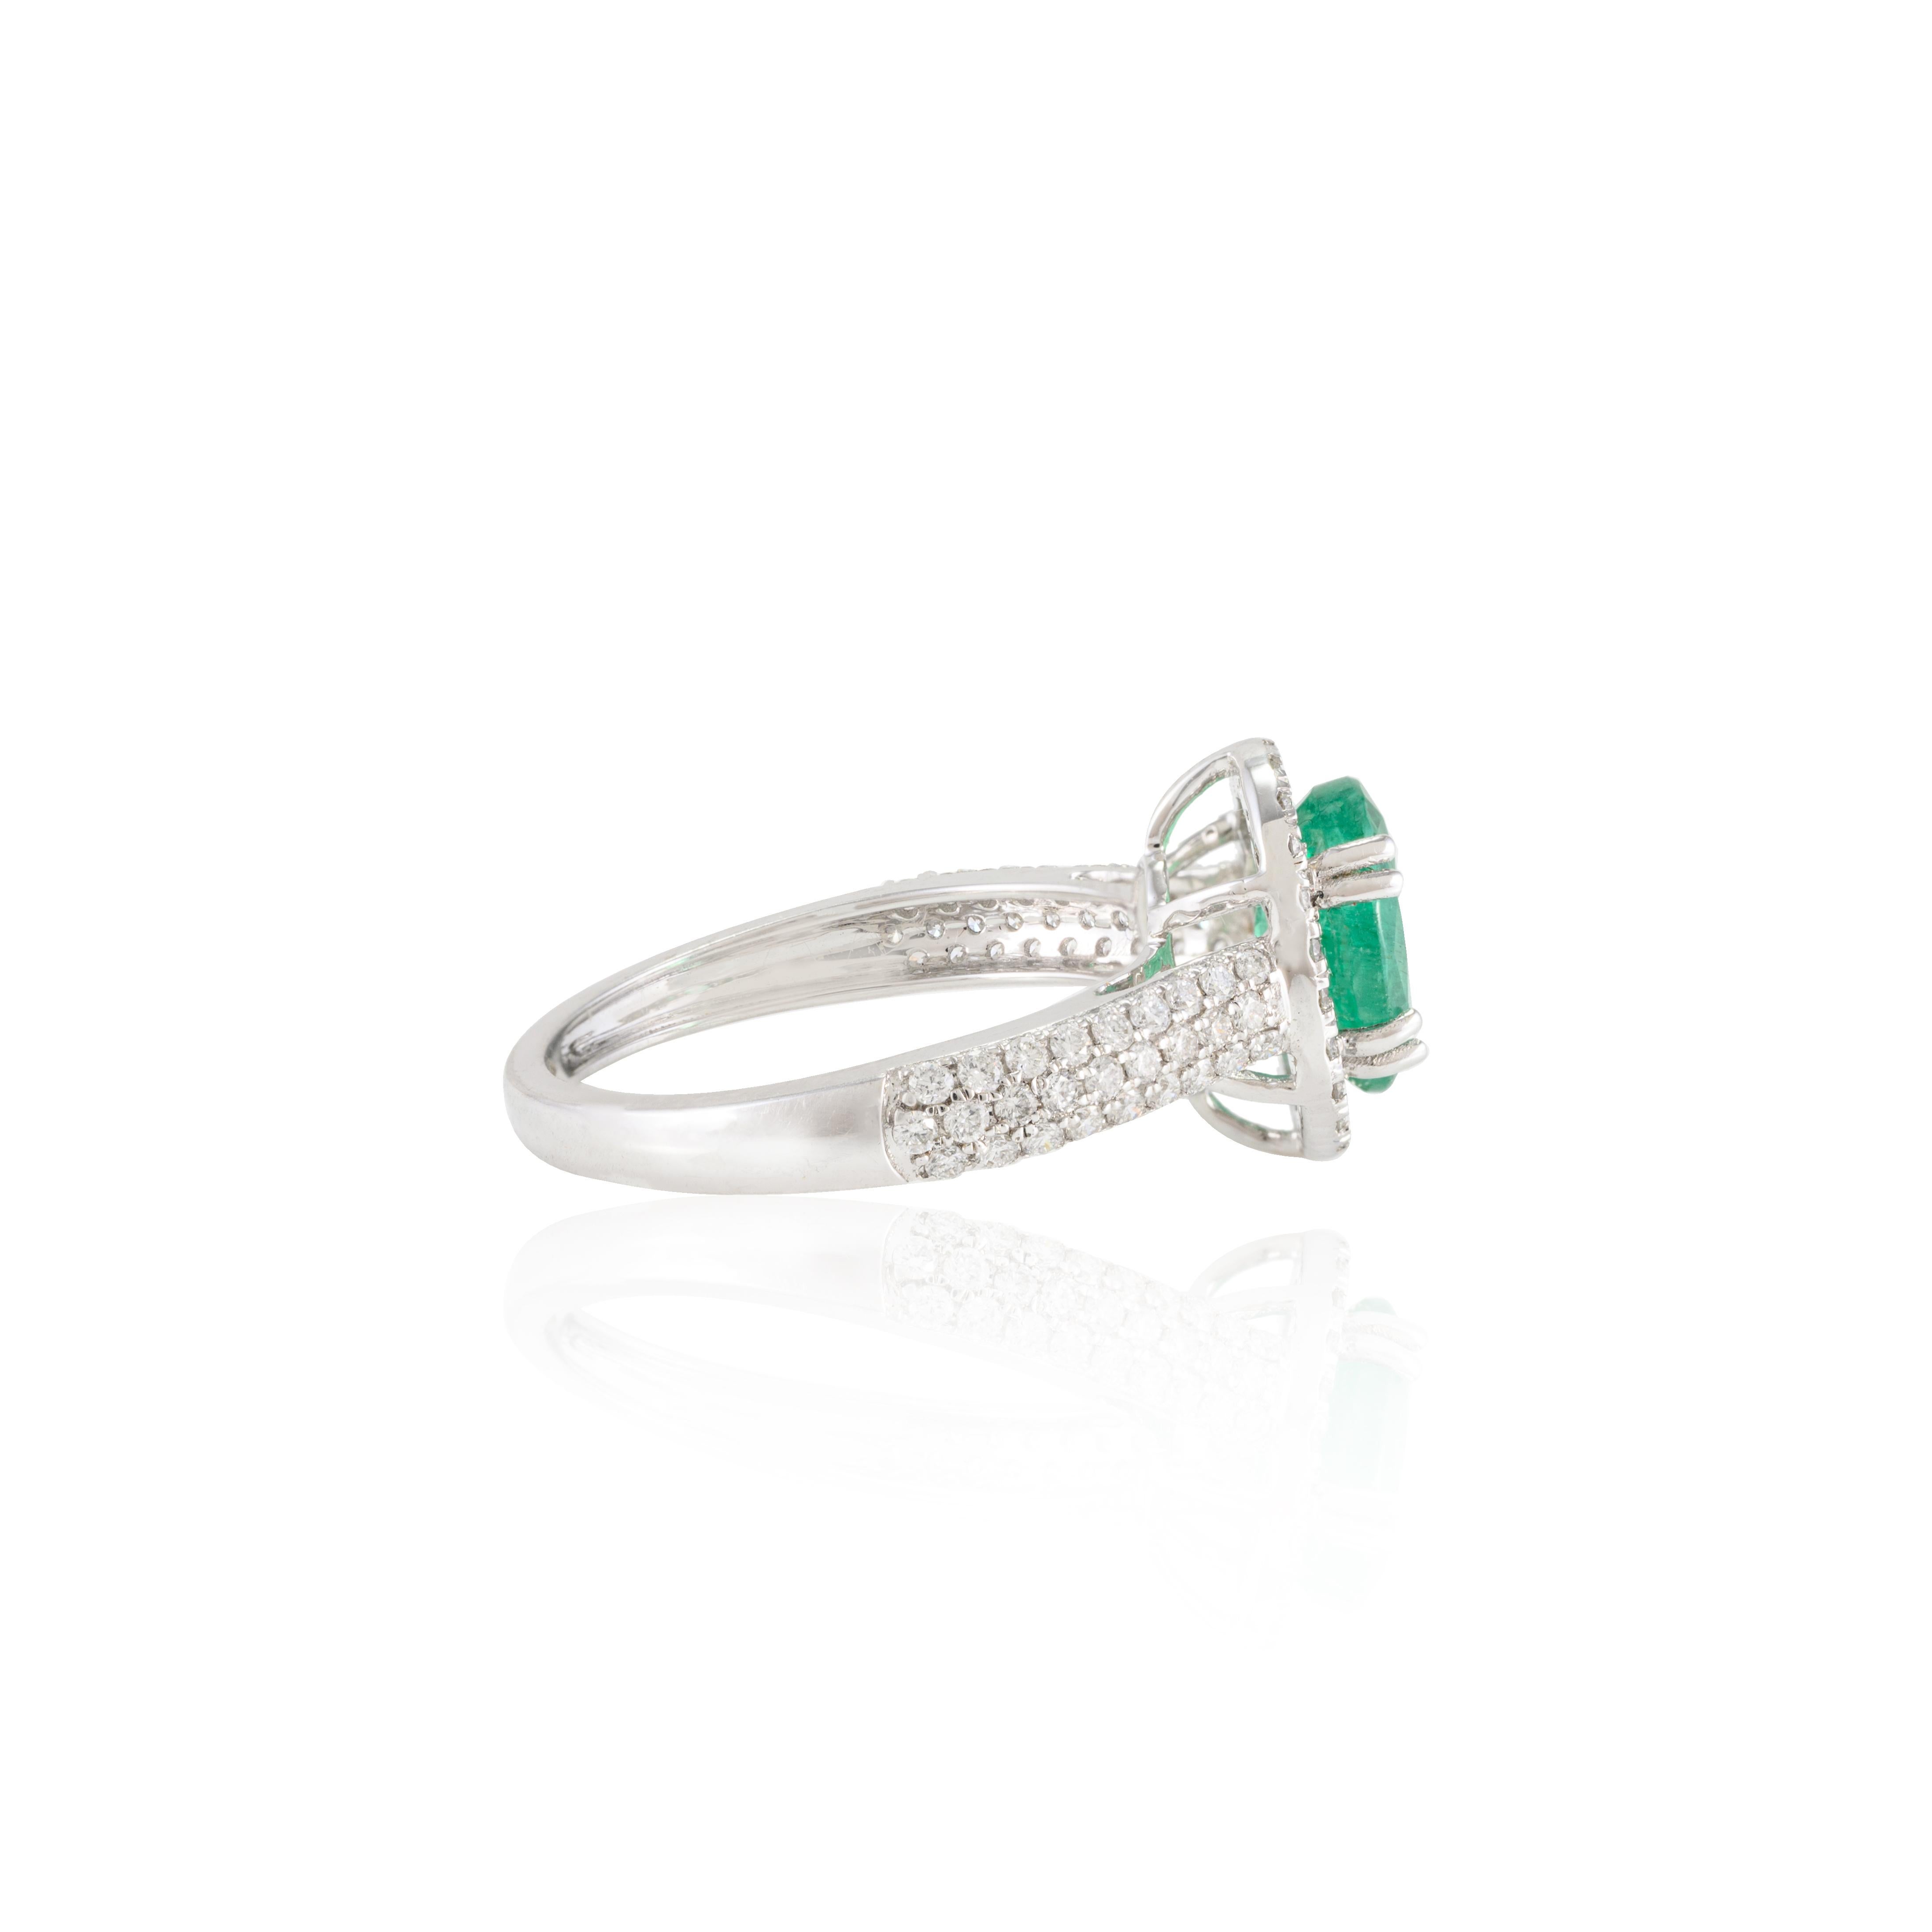 For Sale:  18k Solid White Gold Glamorous Emerald Halo Diamond Engagement Ring for Her 5